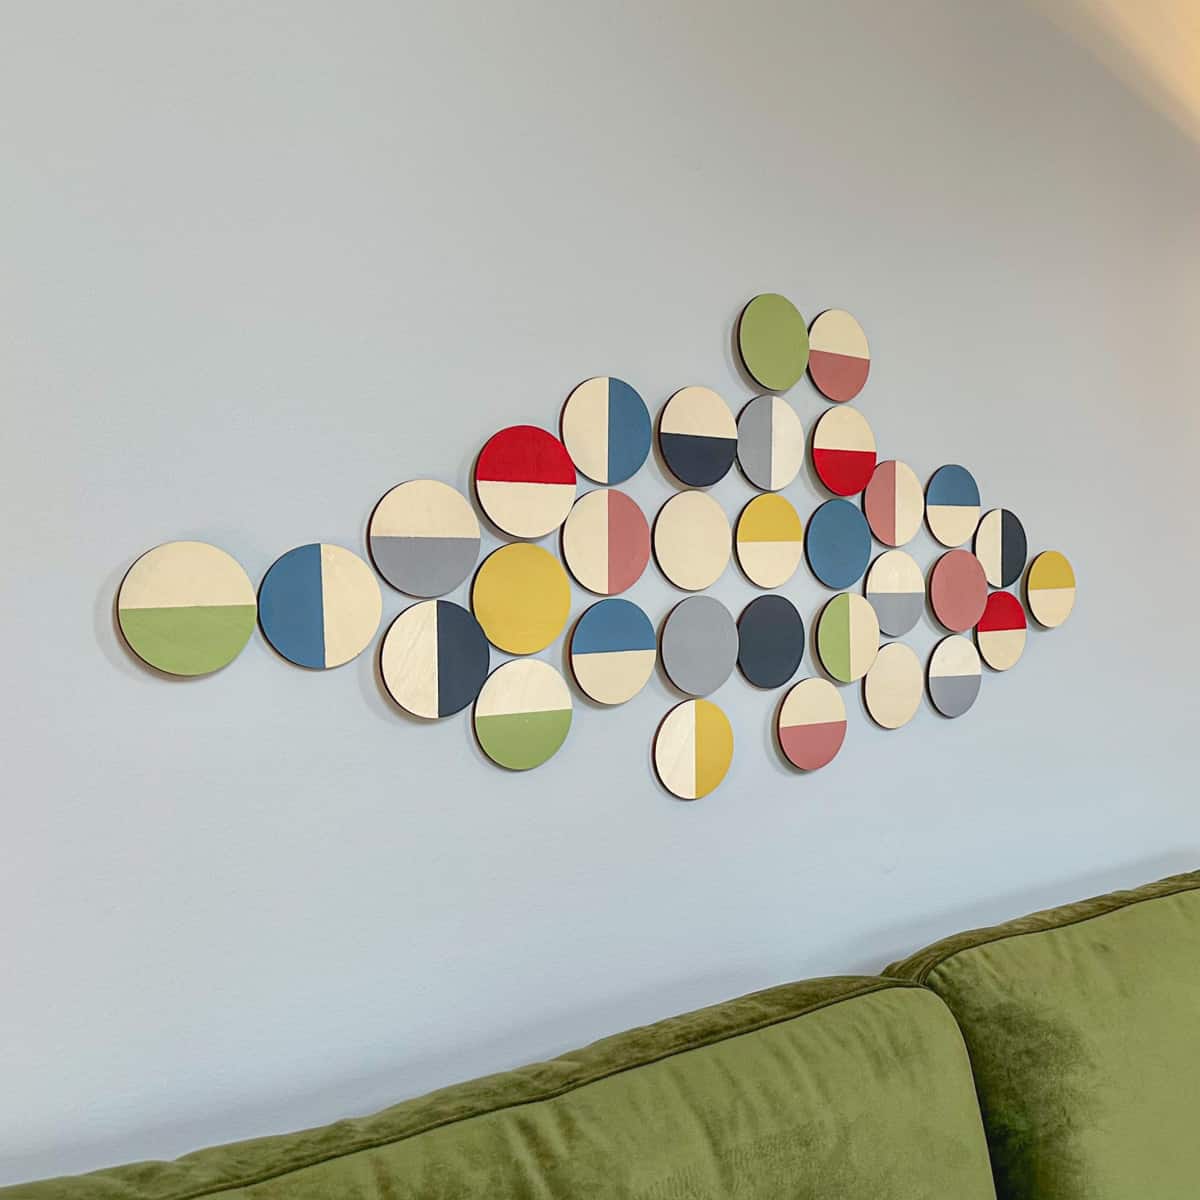 round wood discs on wall painted with mid century modern colors in a geometric pattern, displayed as wall art over sofa.